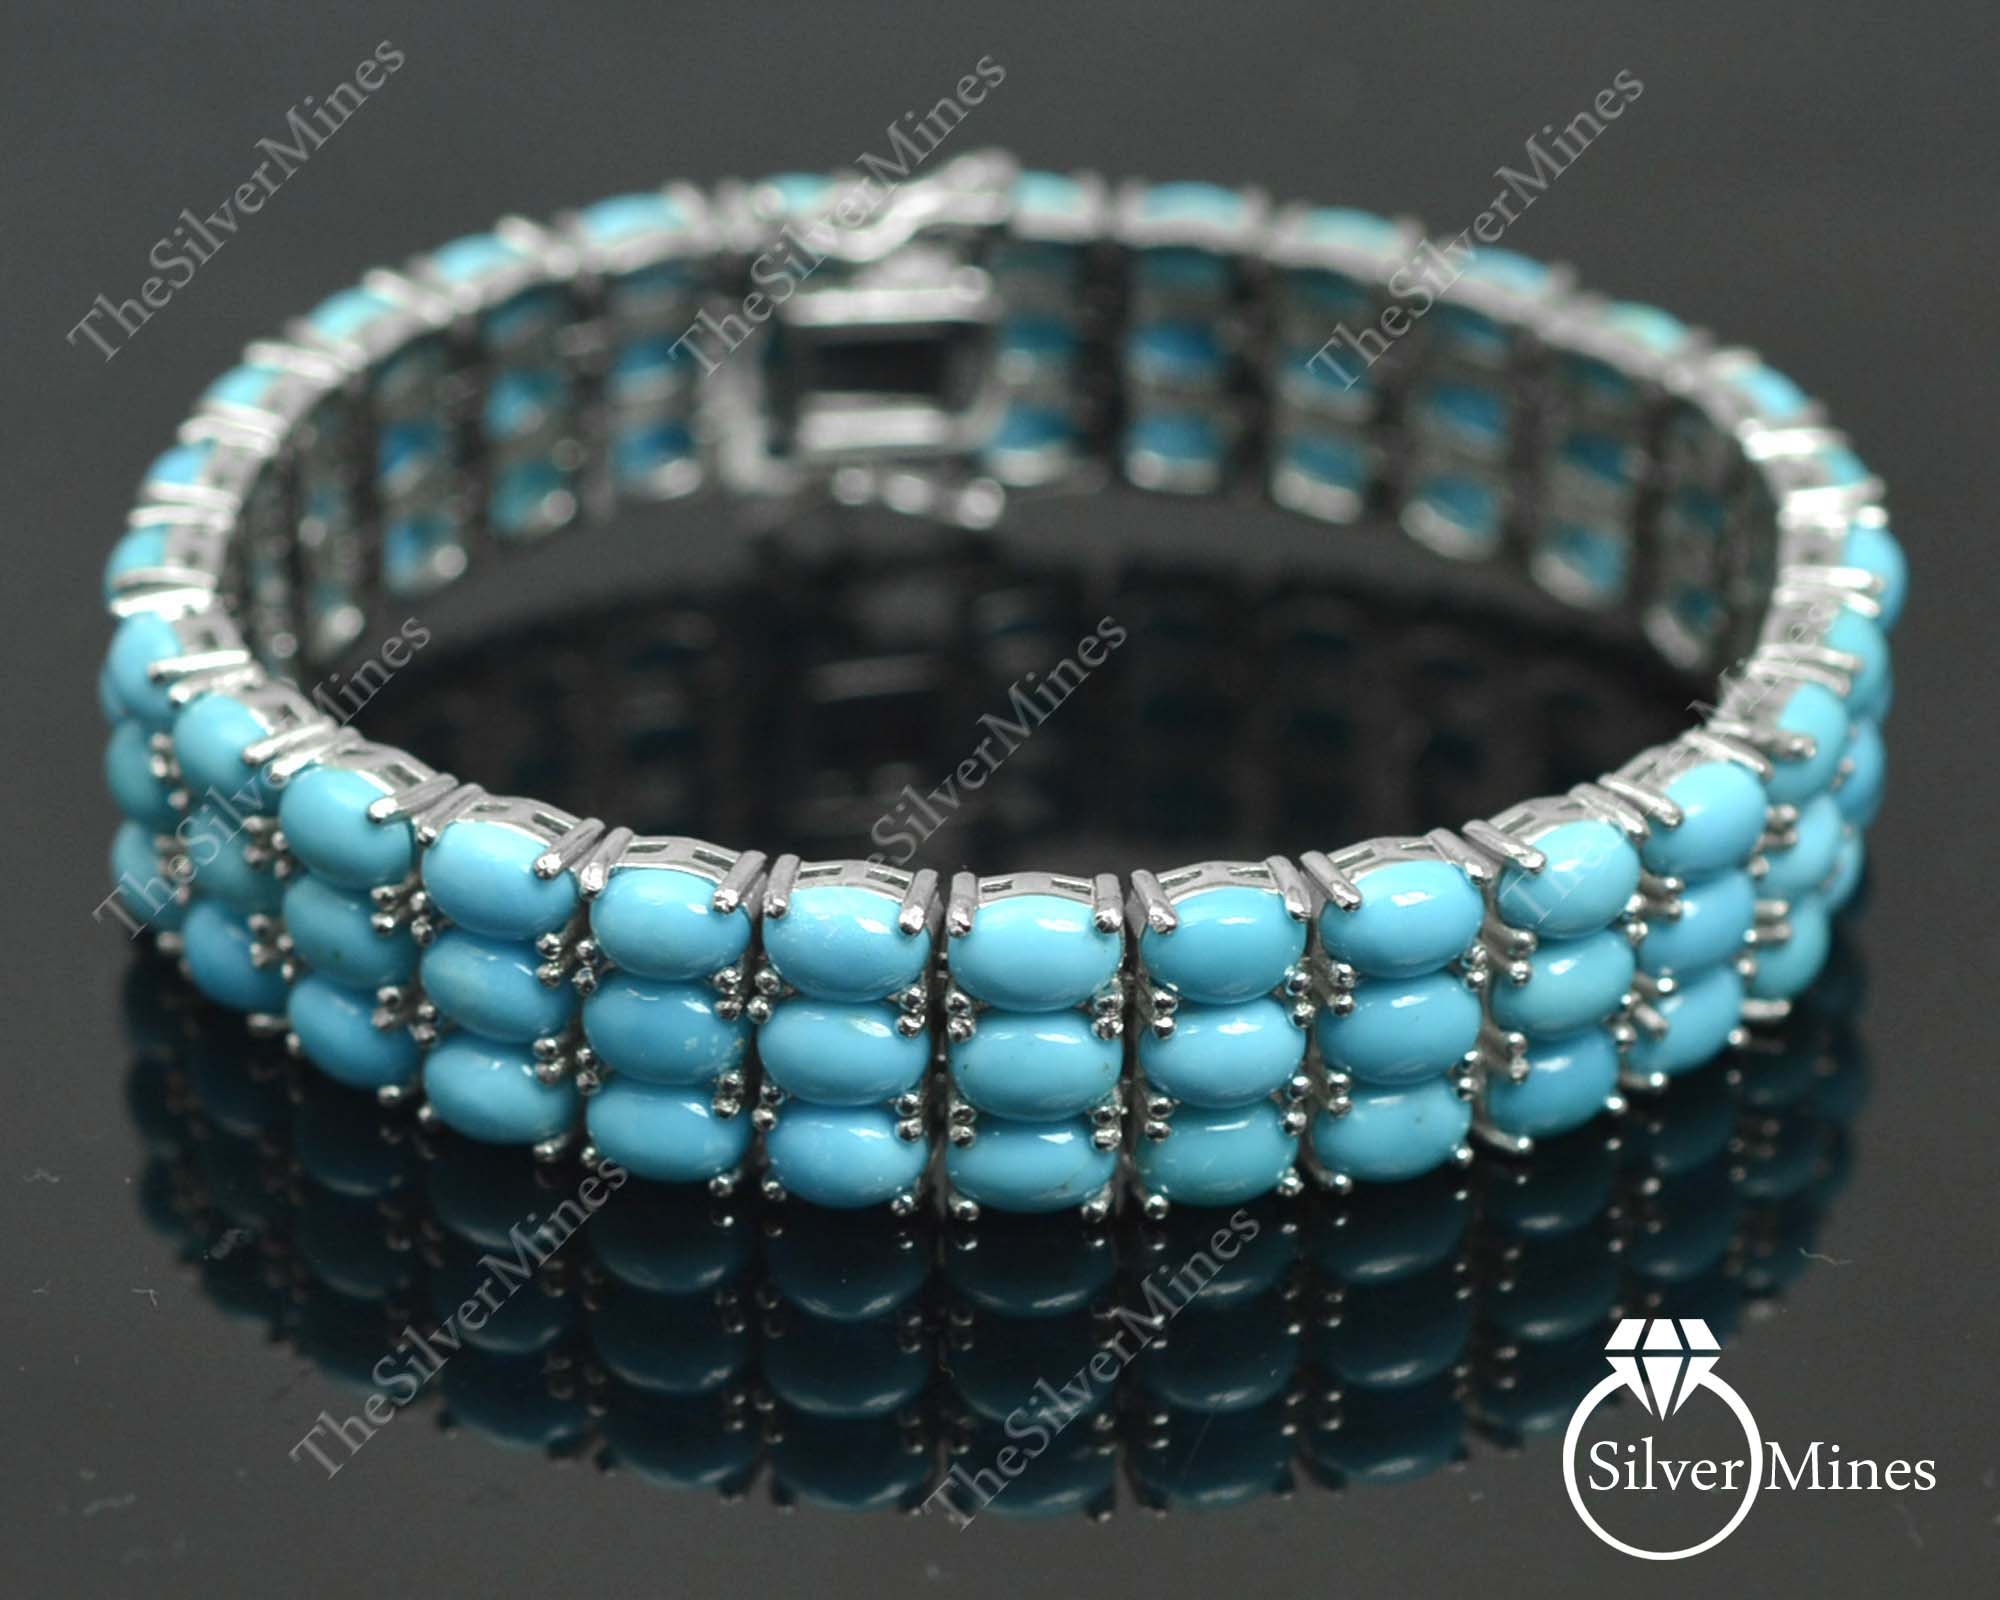 Details about   Natural Turquoise Gemstone 925 Solid Sterling Silver Three Line Tennis Bracelet